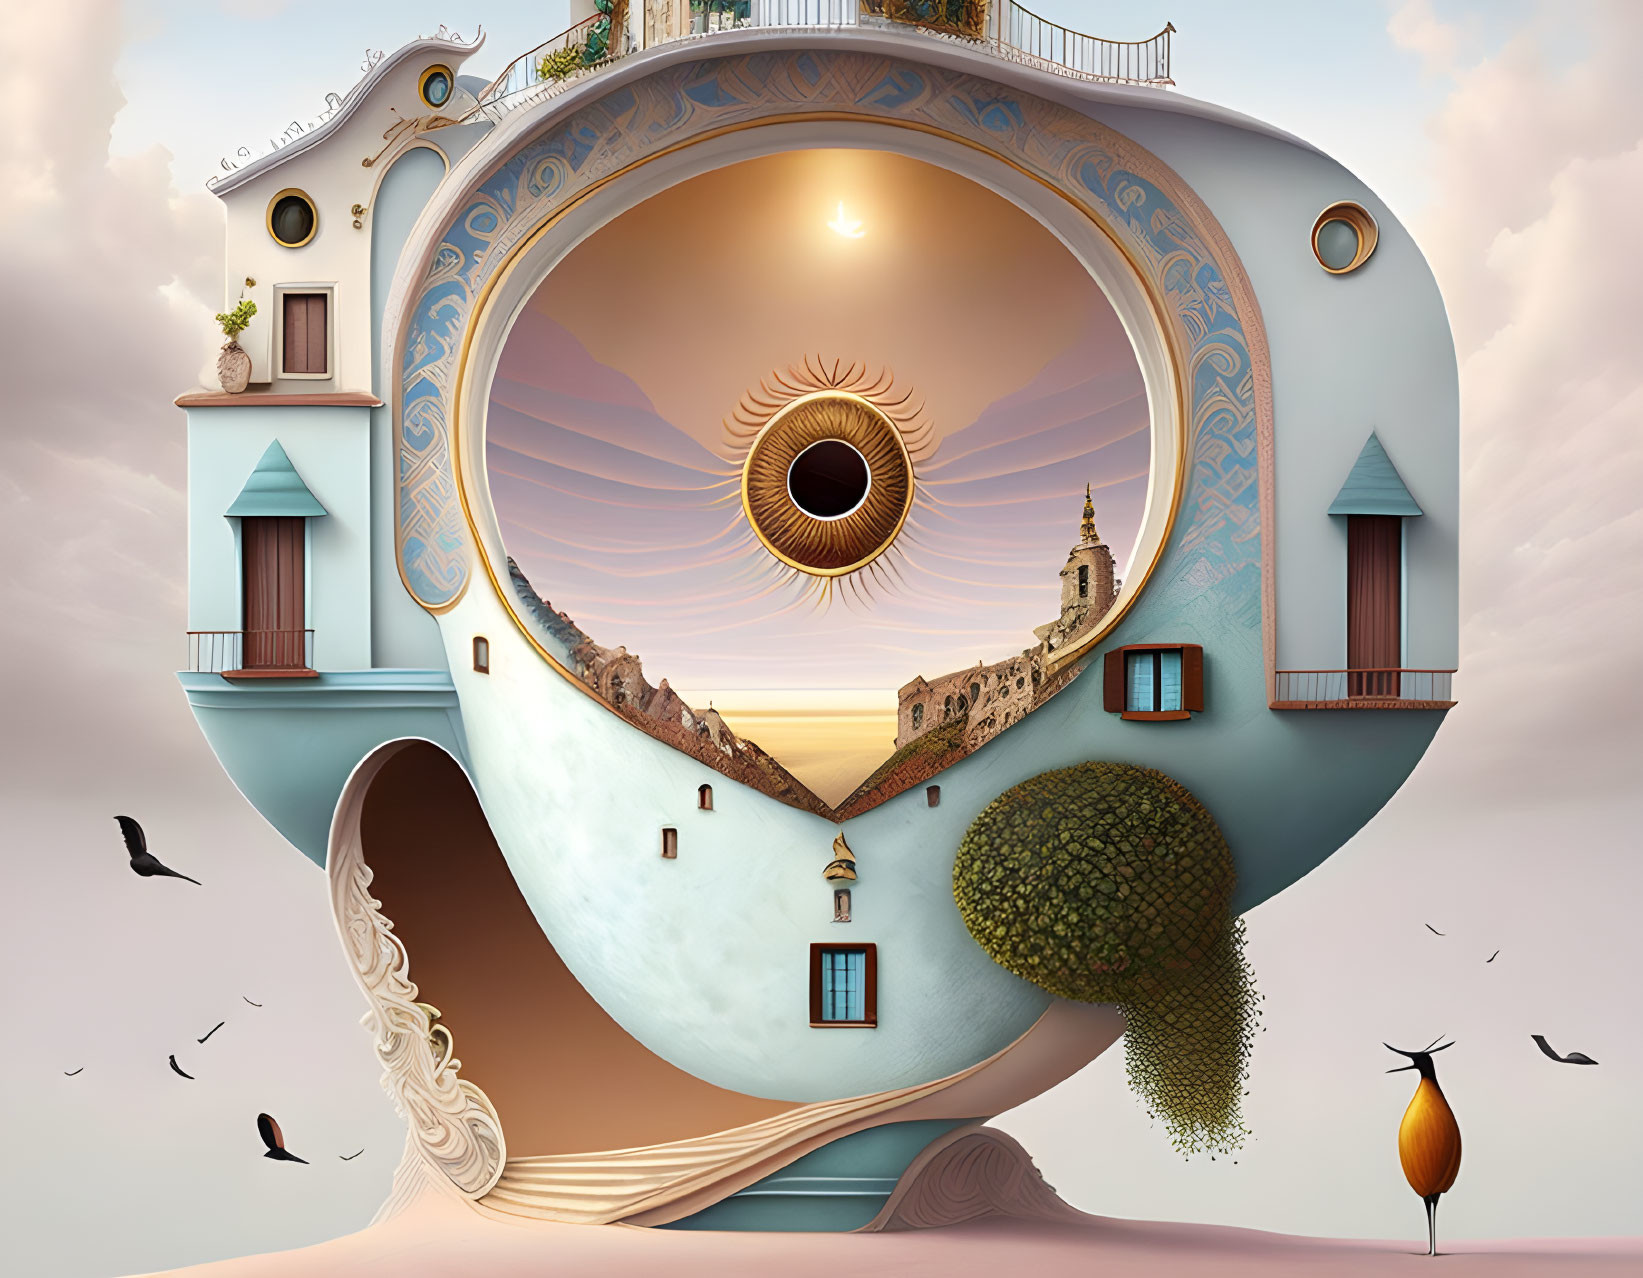 Whimsical eyeball-shaped structure with bird and architectural elements